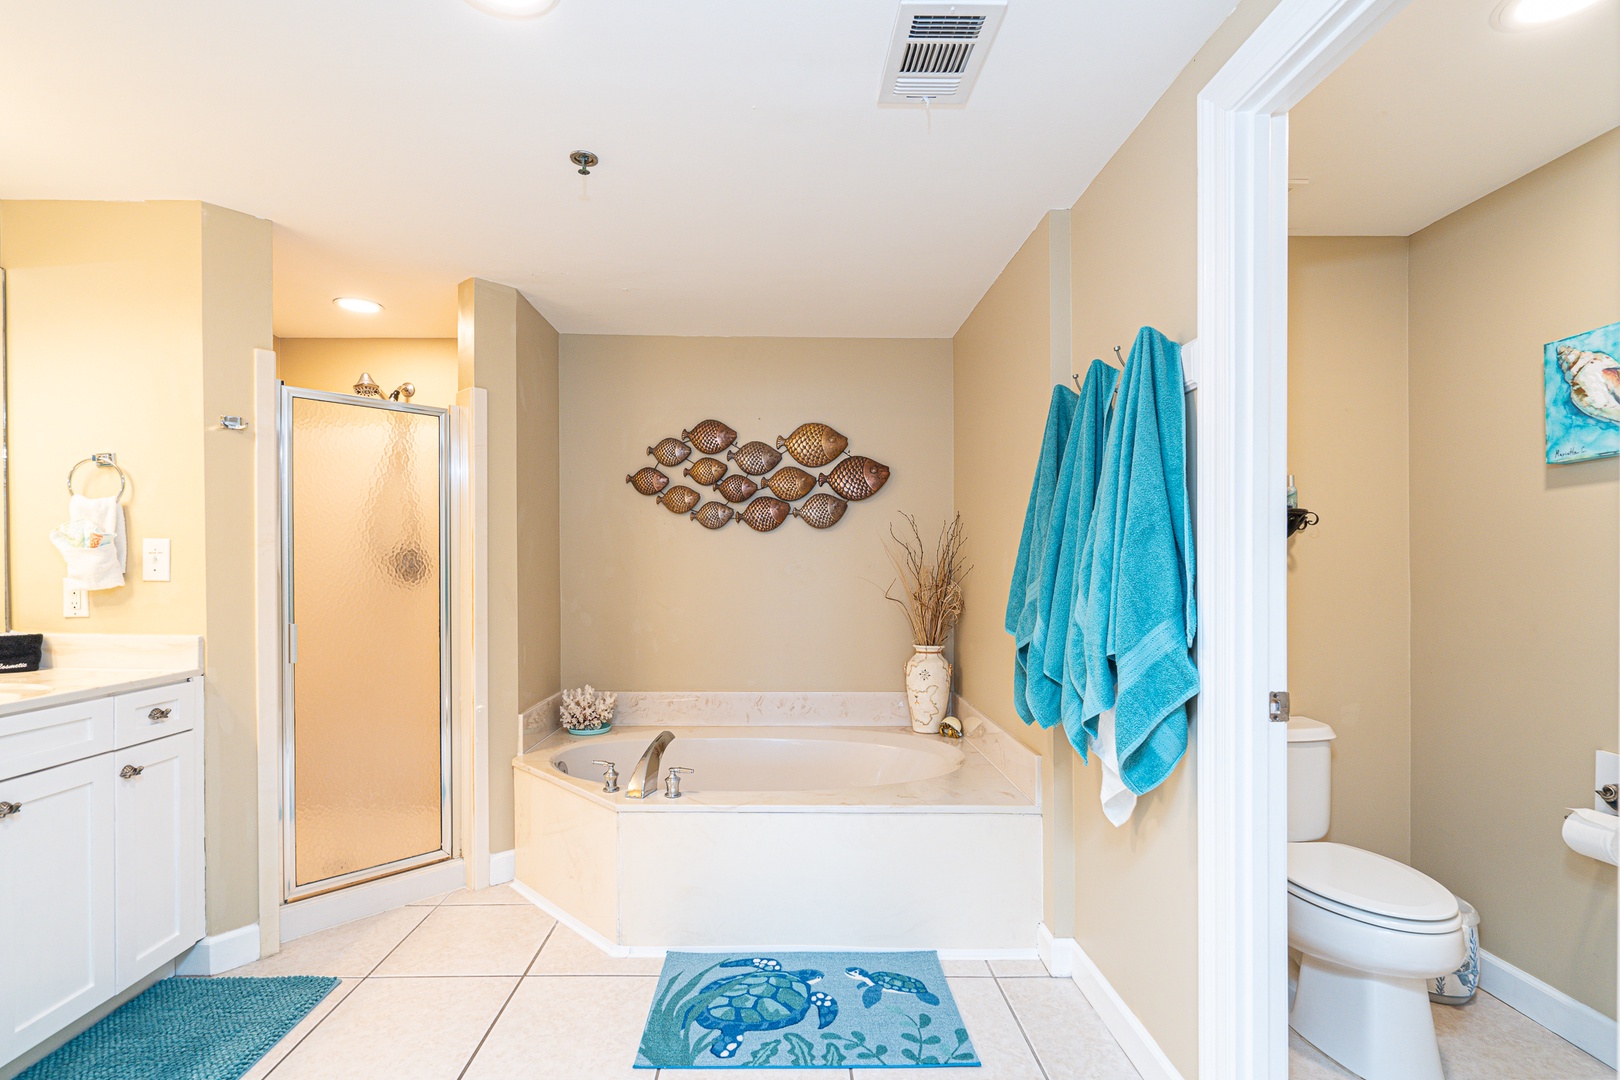 The master ensuite showcases a dual vanity, glass shower, & soaking tub